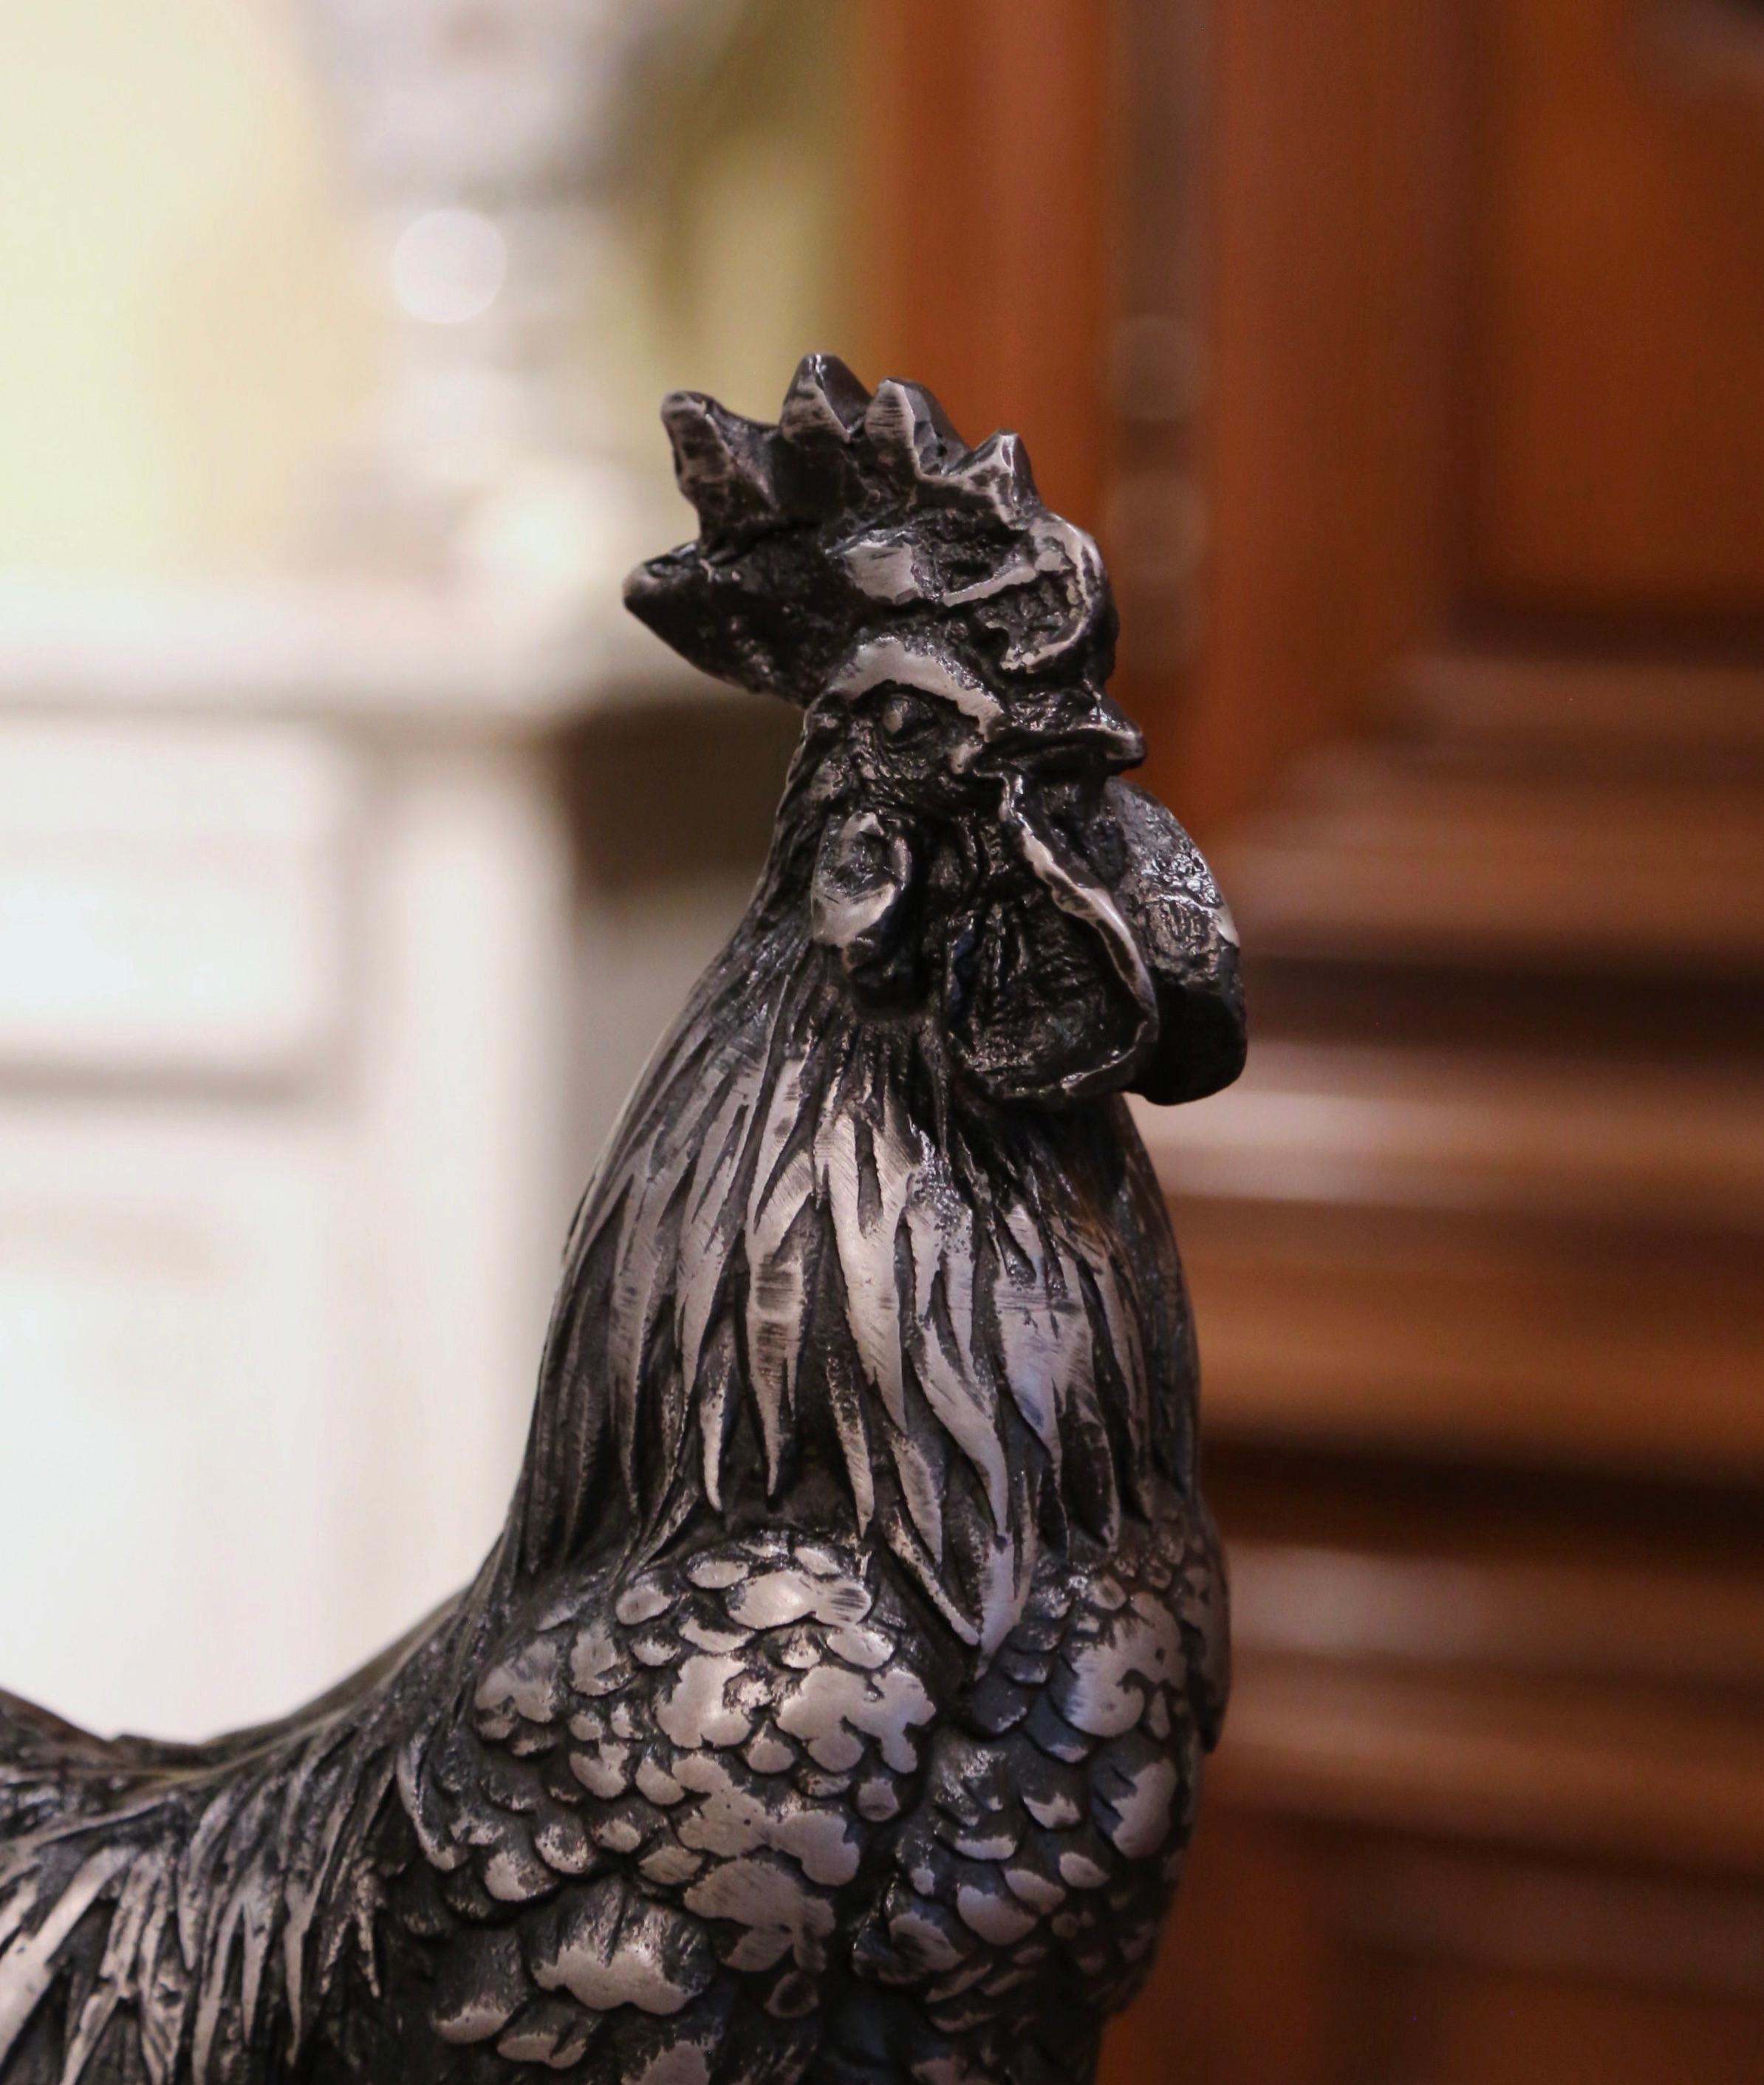 Decorate a kitchen or breakfast room with this antique iron rooster. Crafted in France, circa 1920, the tall sculpture features a majestic chanticleer rooster standing on a round base. The elegant bird, symbol of France, is in excellent condition